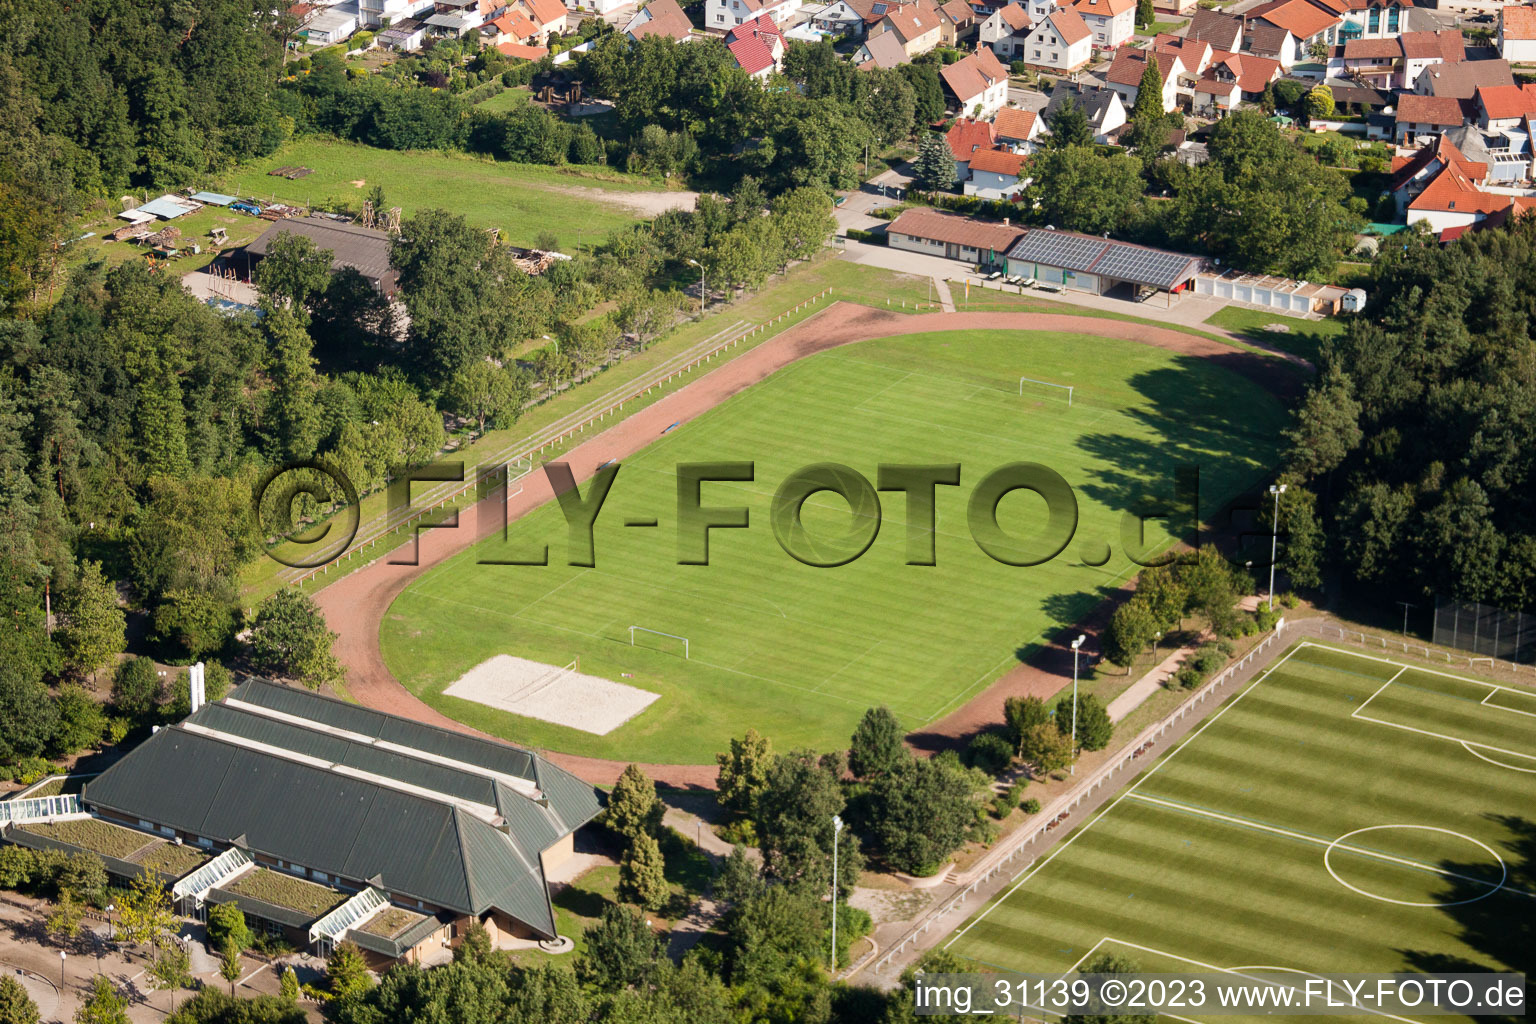 TUS 08 new artificial turf pitch in the district Schaidt in Wörth am Rhein in the state Rhineland-Palatinate, Germany out of the air